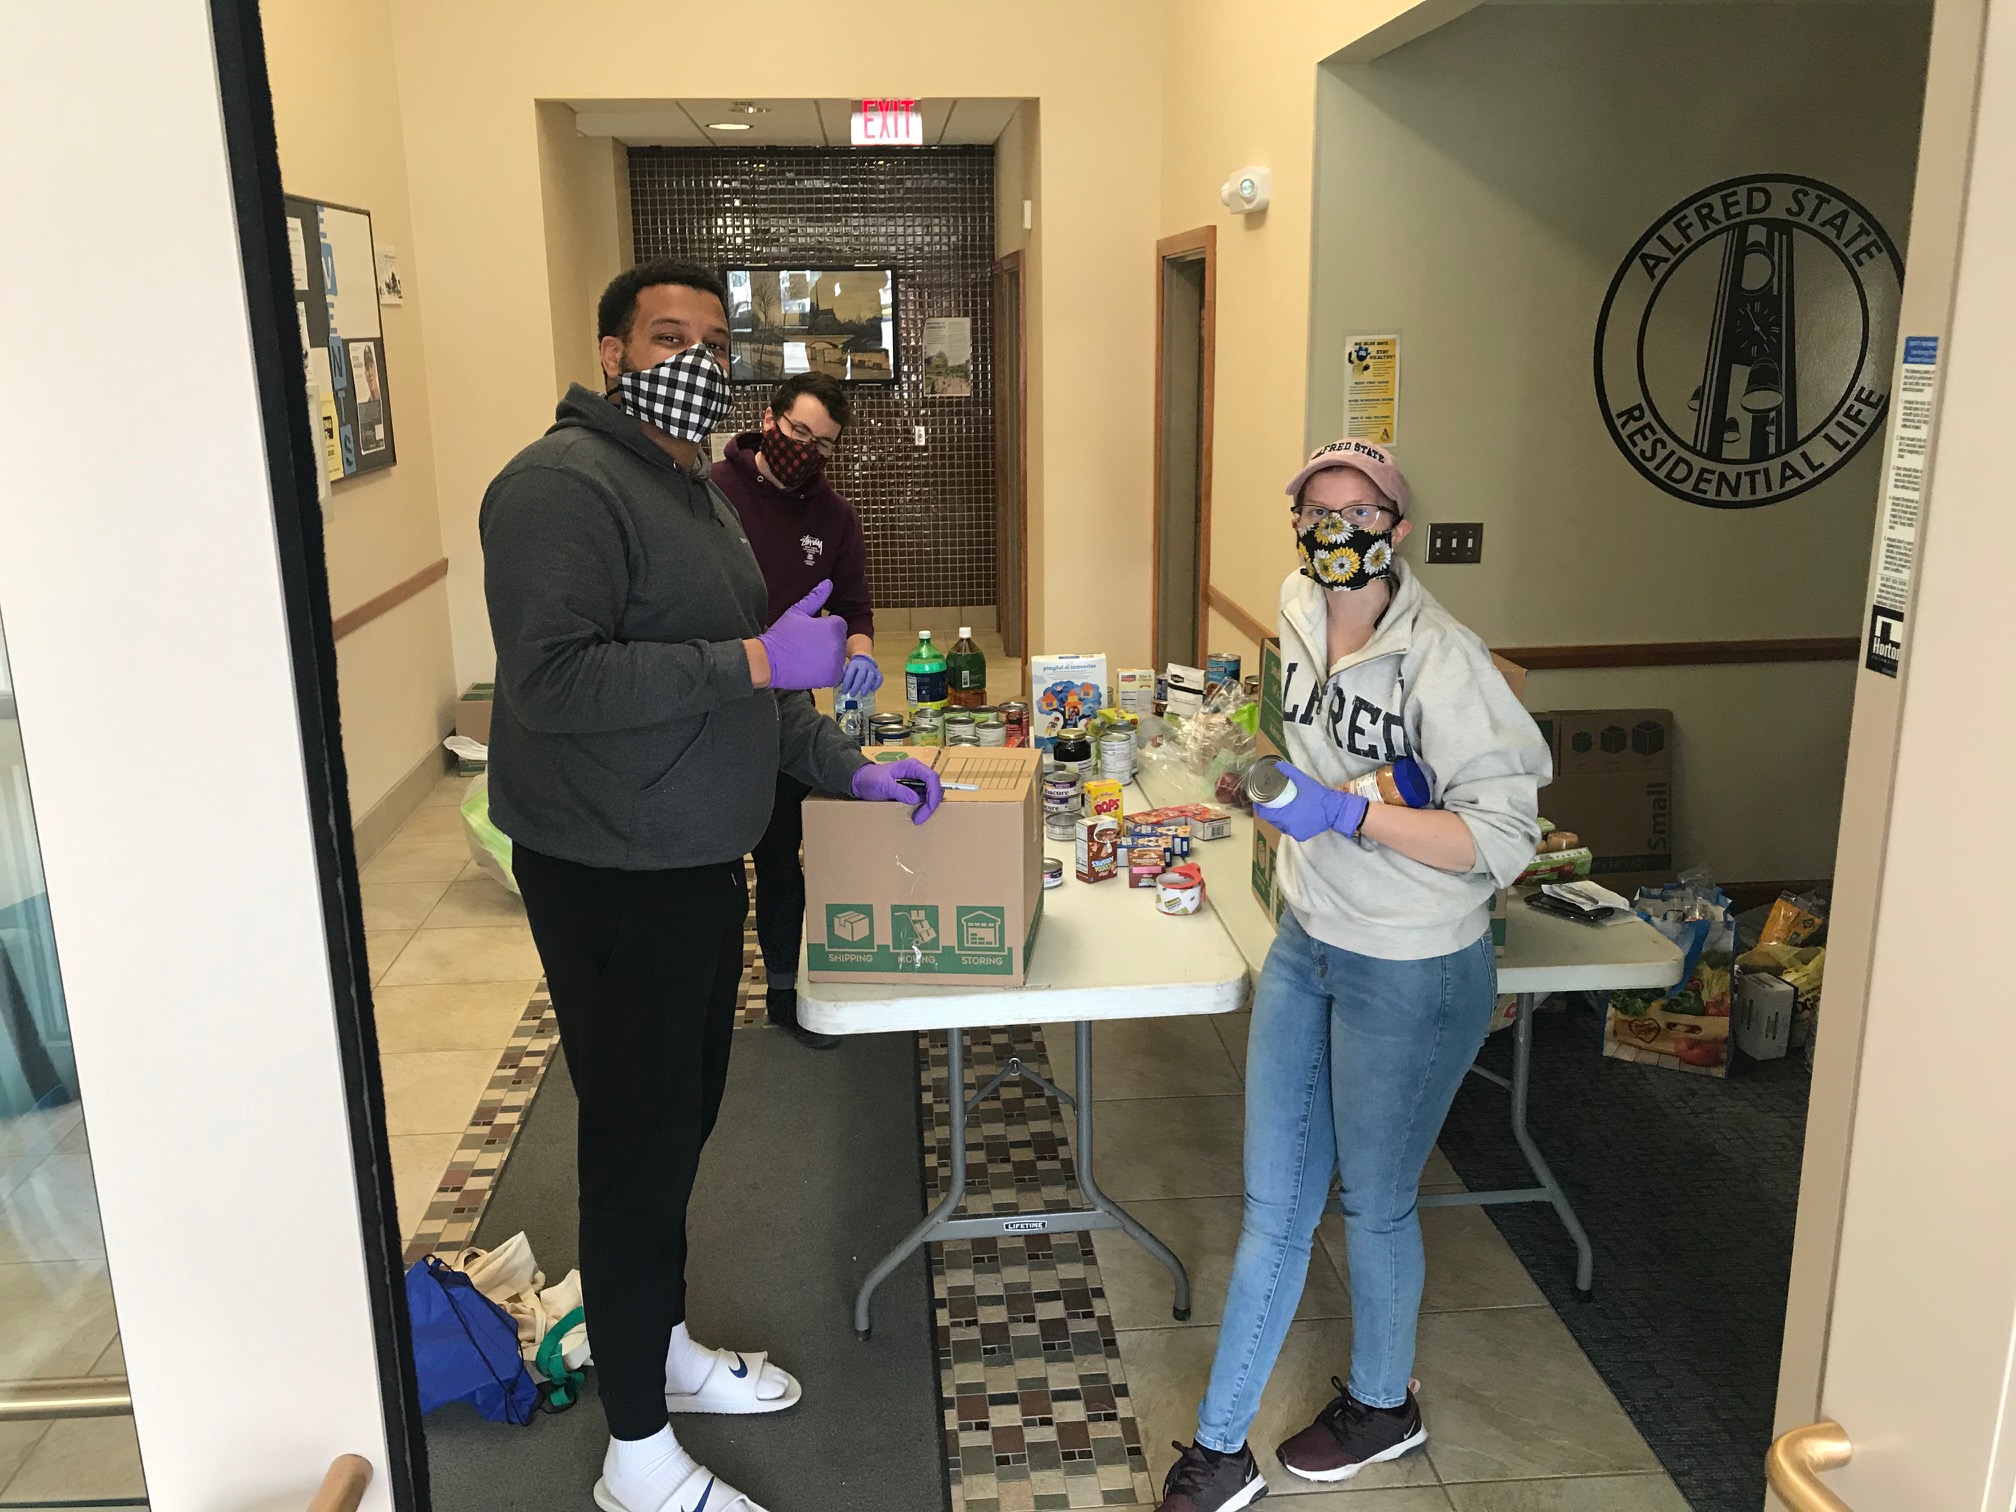 Alfred State staff members help a student through the new pilot food pantry program